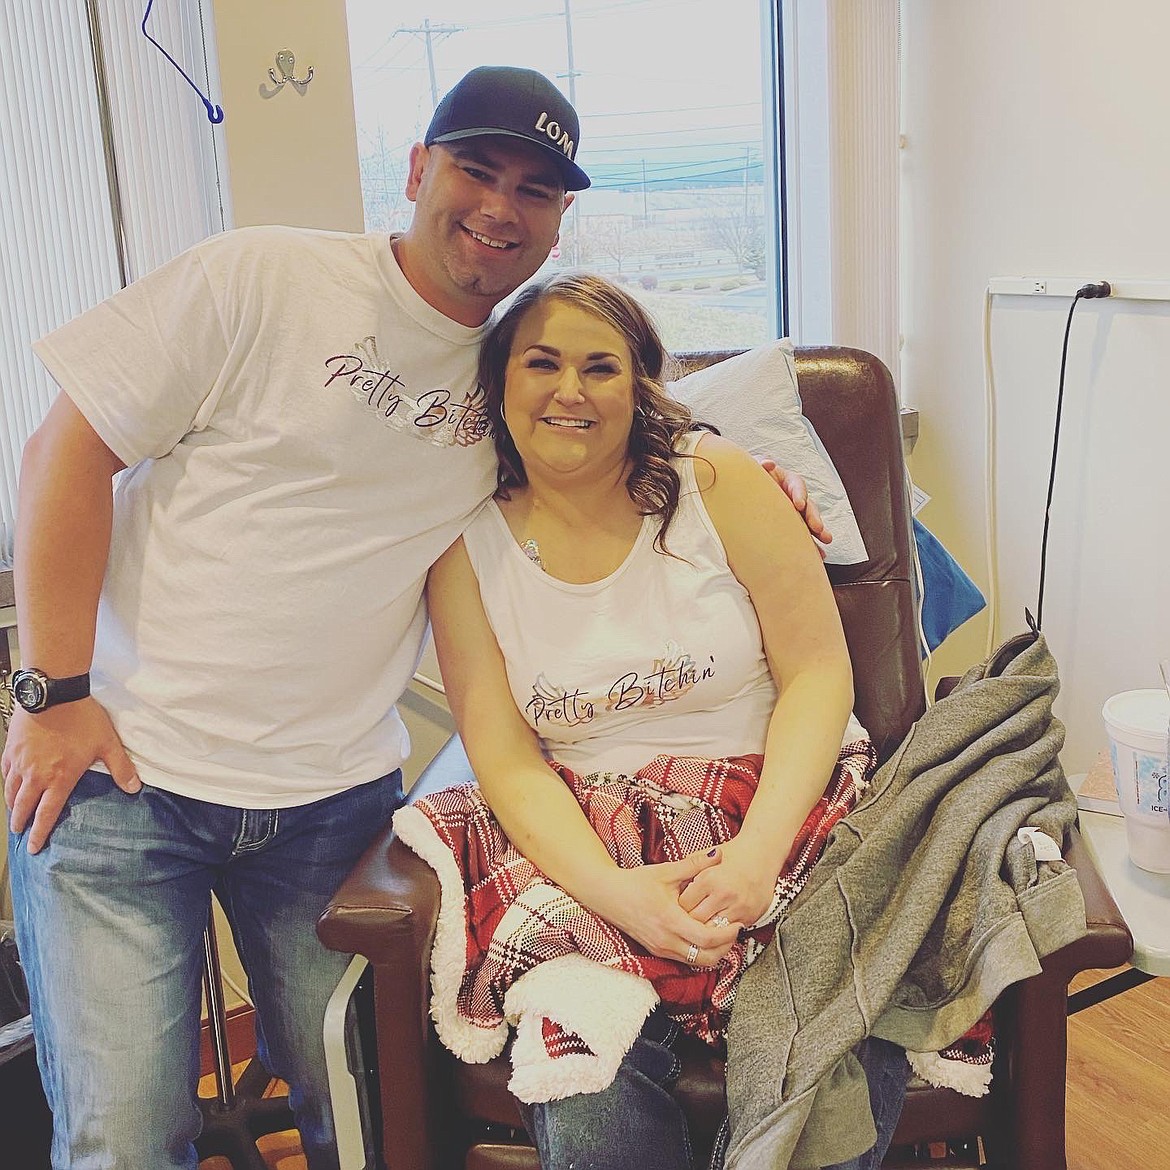 Dusti and Tara Zerbo smile together after Tara’s second round of chemotherapy at Cancer Care Northwest in Spokane in December, 2019.